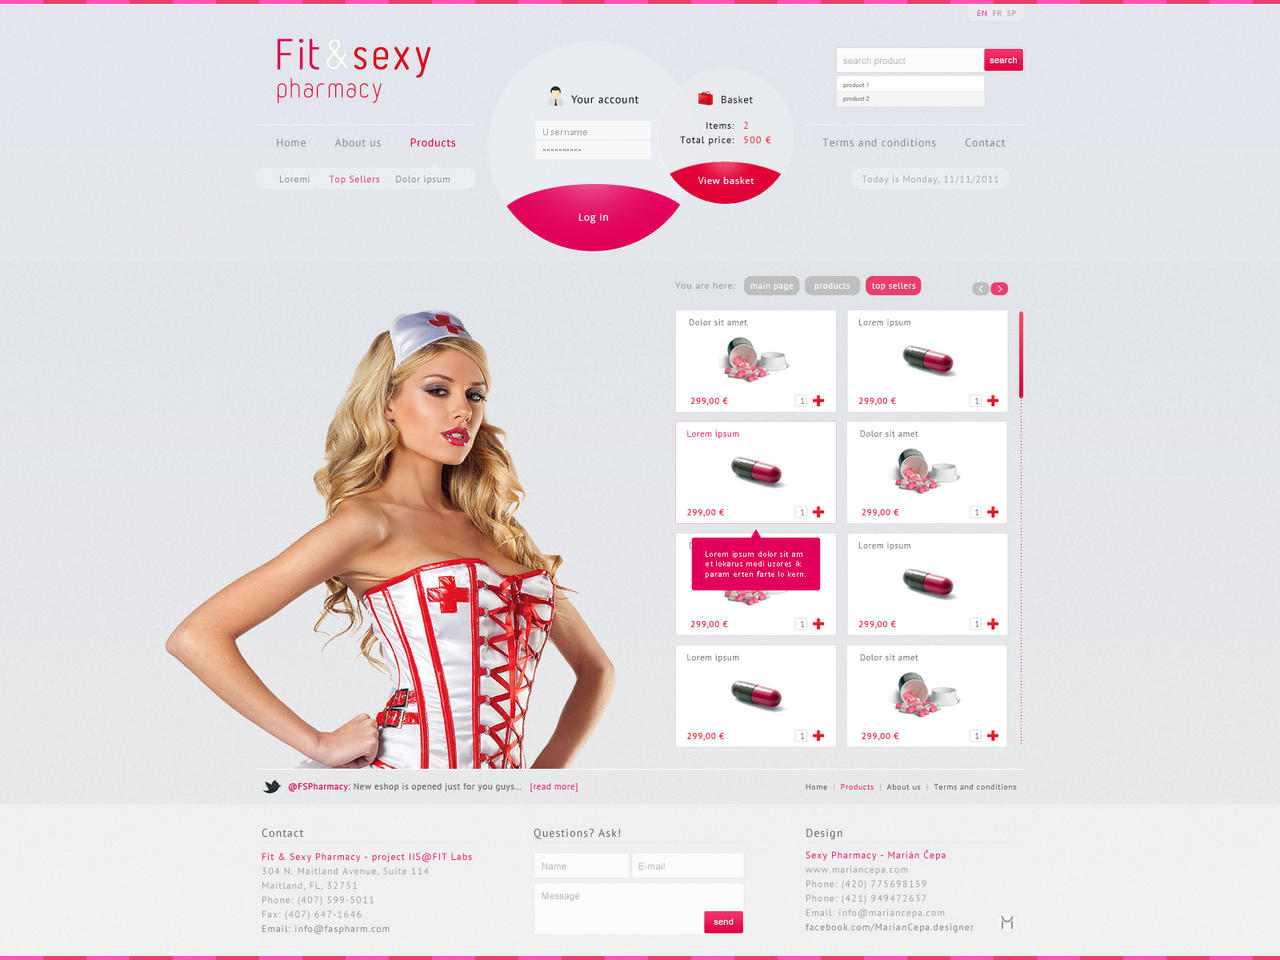 Fit-sexy pharmacy